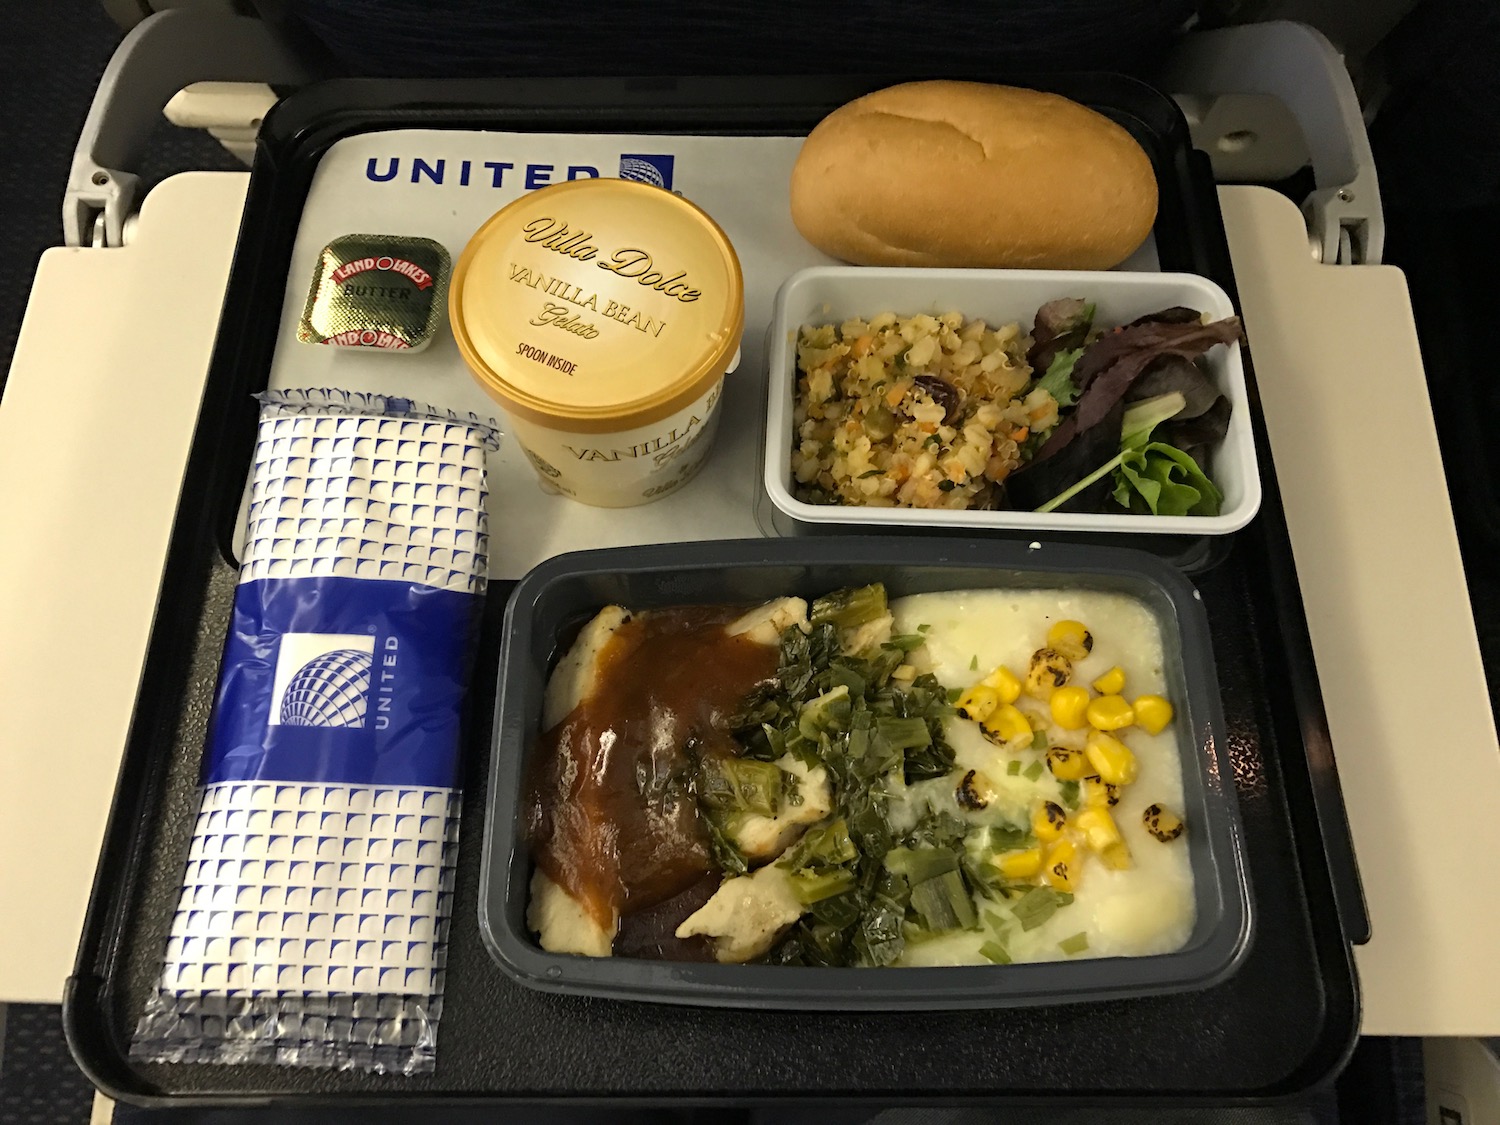 United Airlines Economy Class Meal SFO-FRA 01